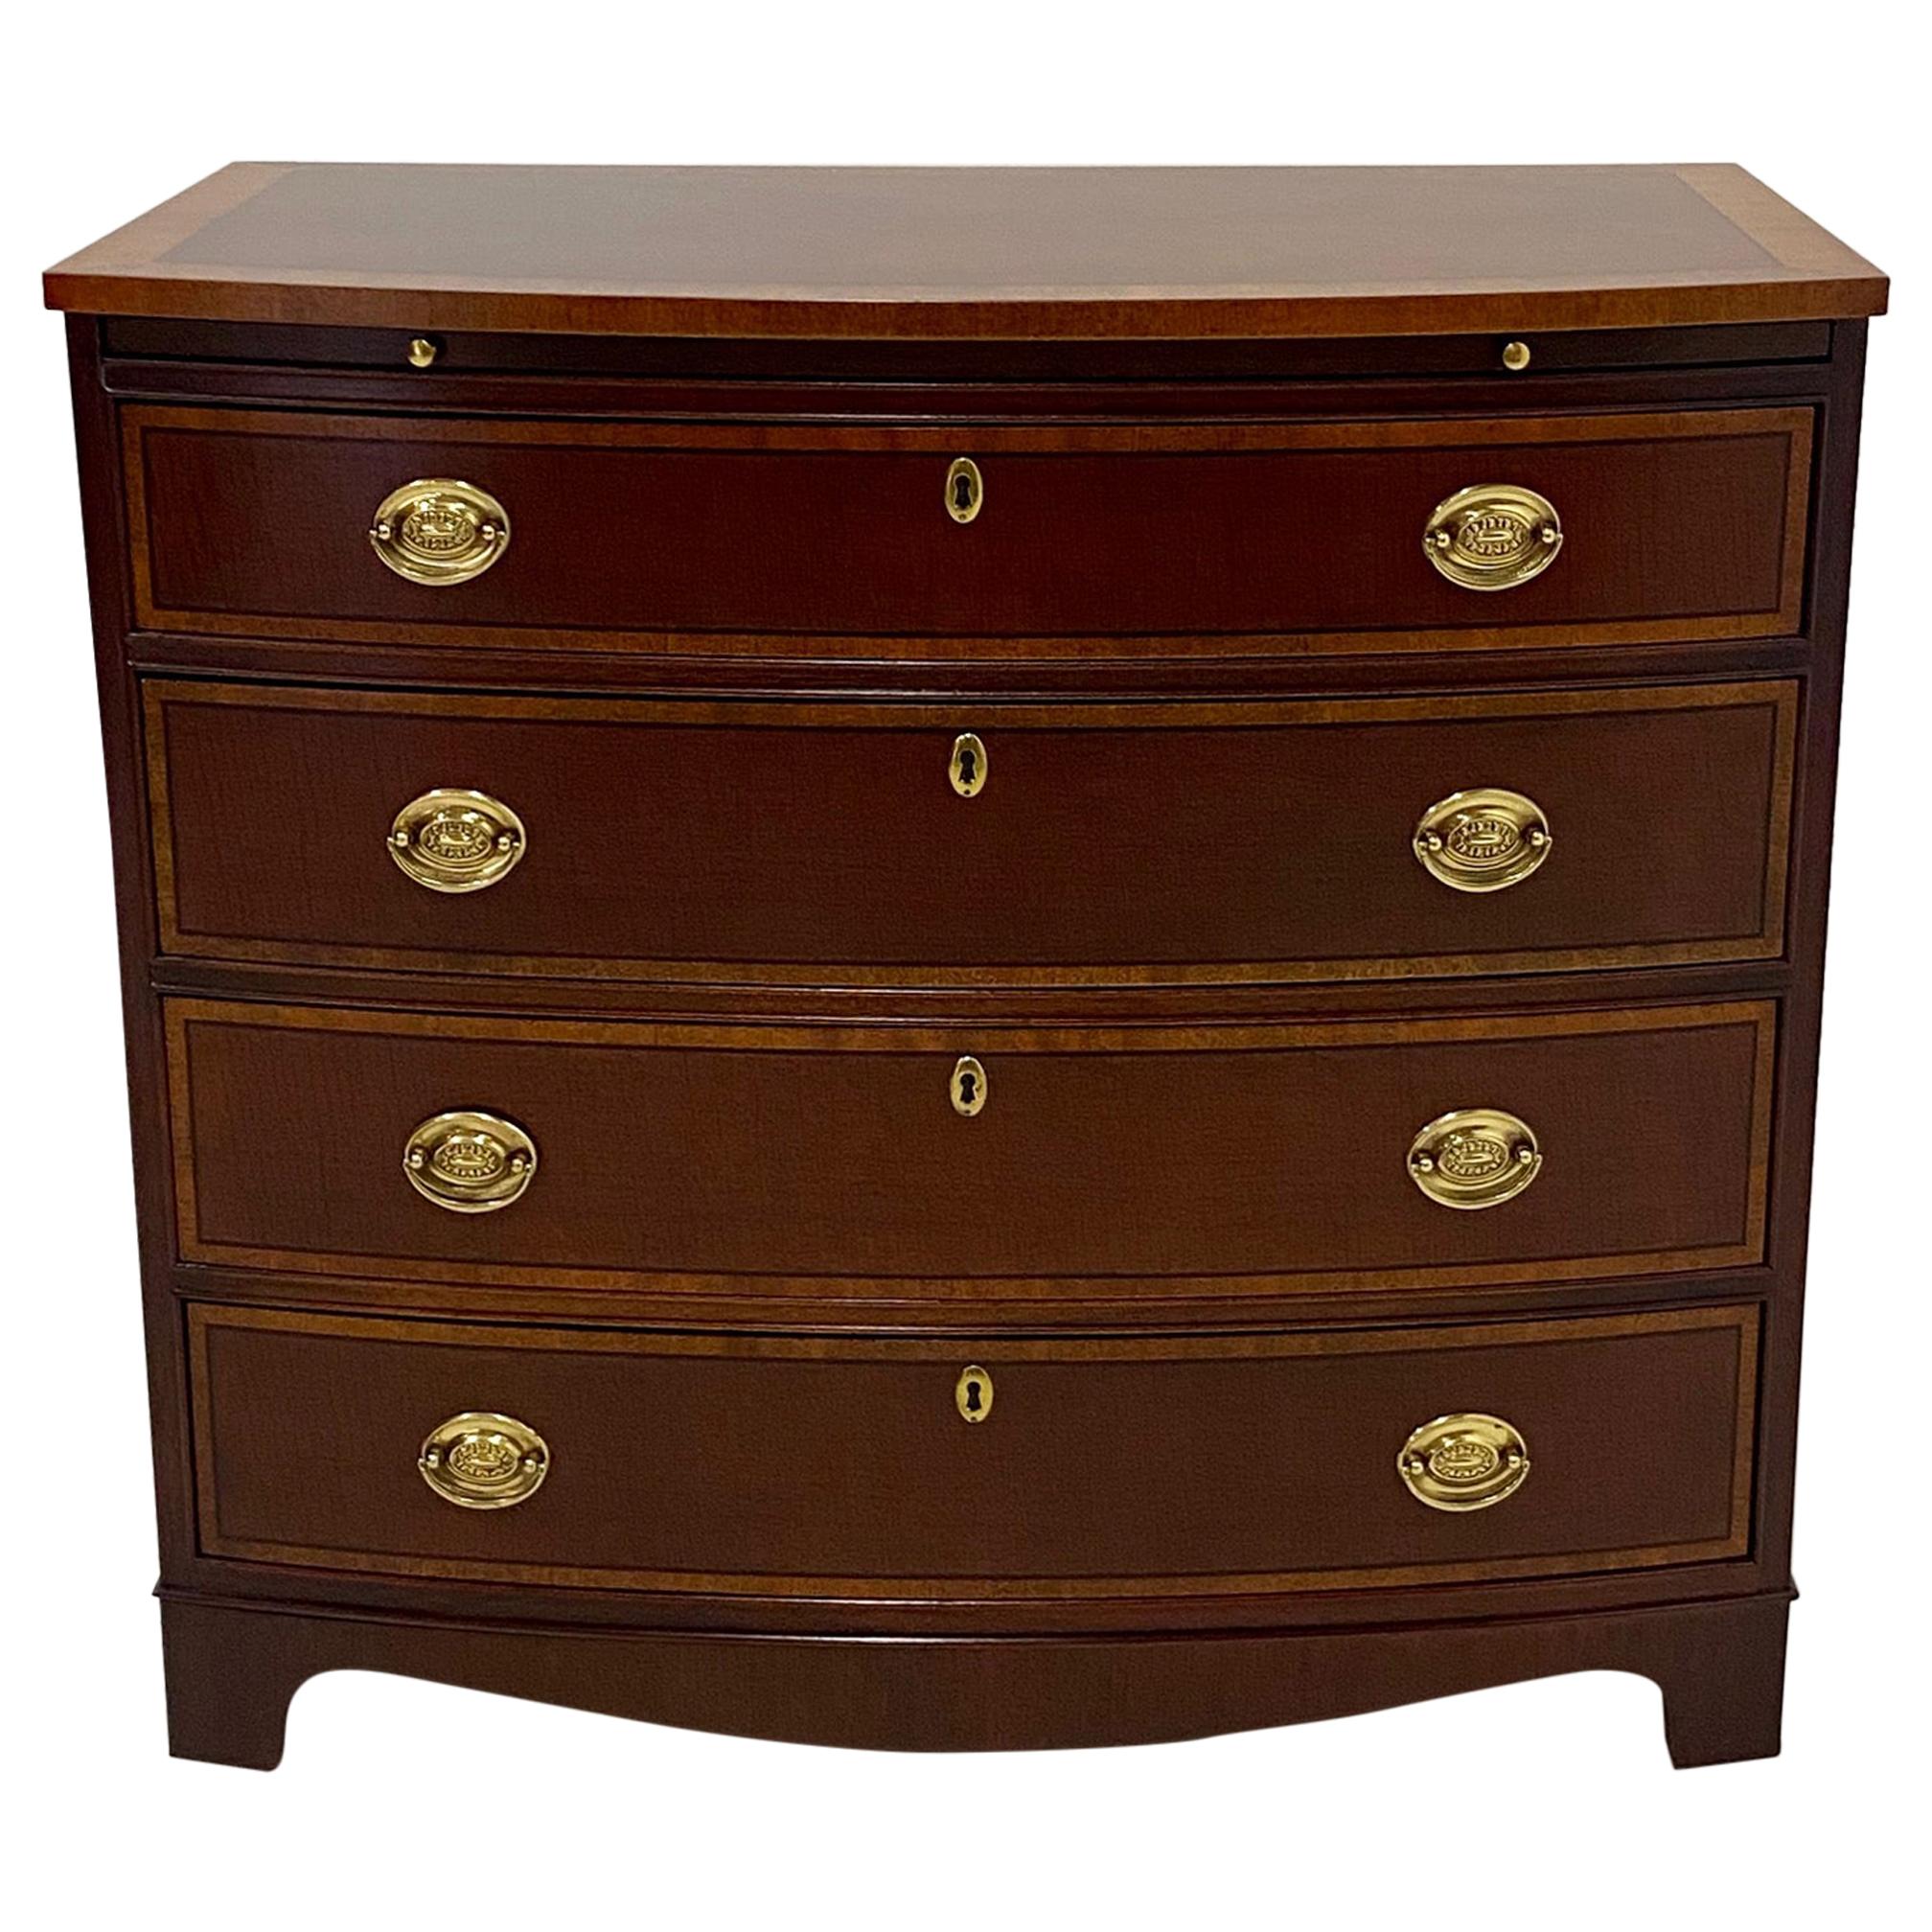 Handsome Bow Front Mahogany and Satinwood Bachelors Chest of Drawers